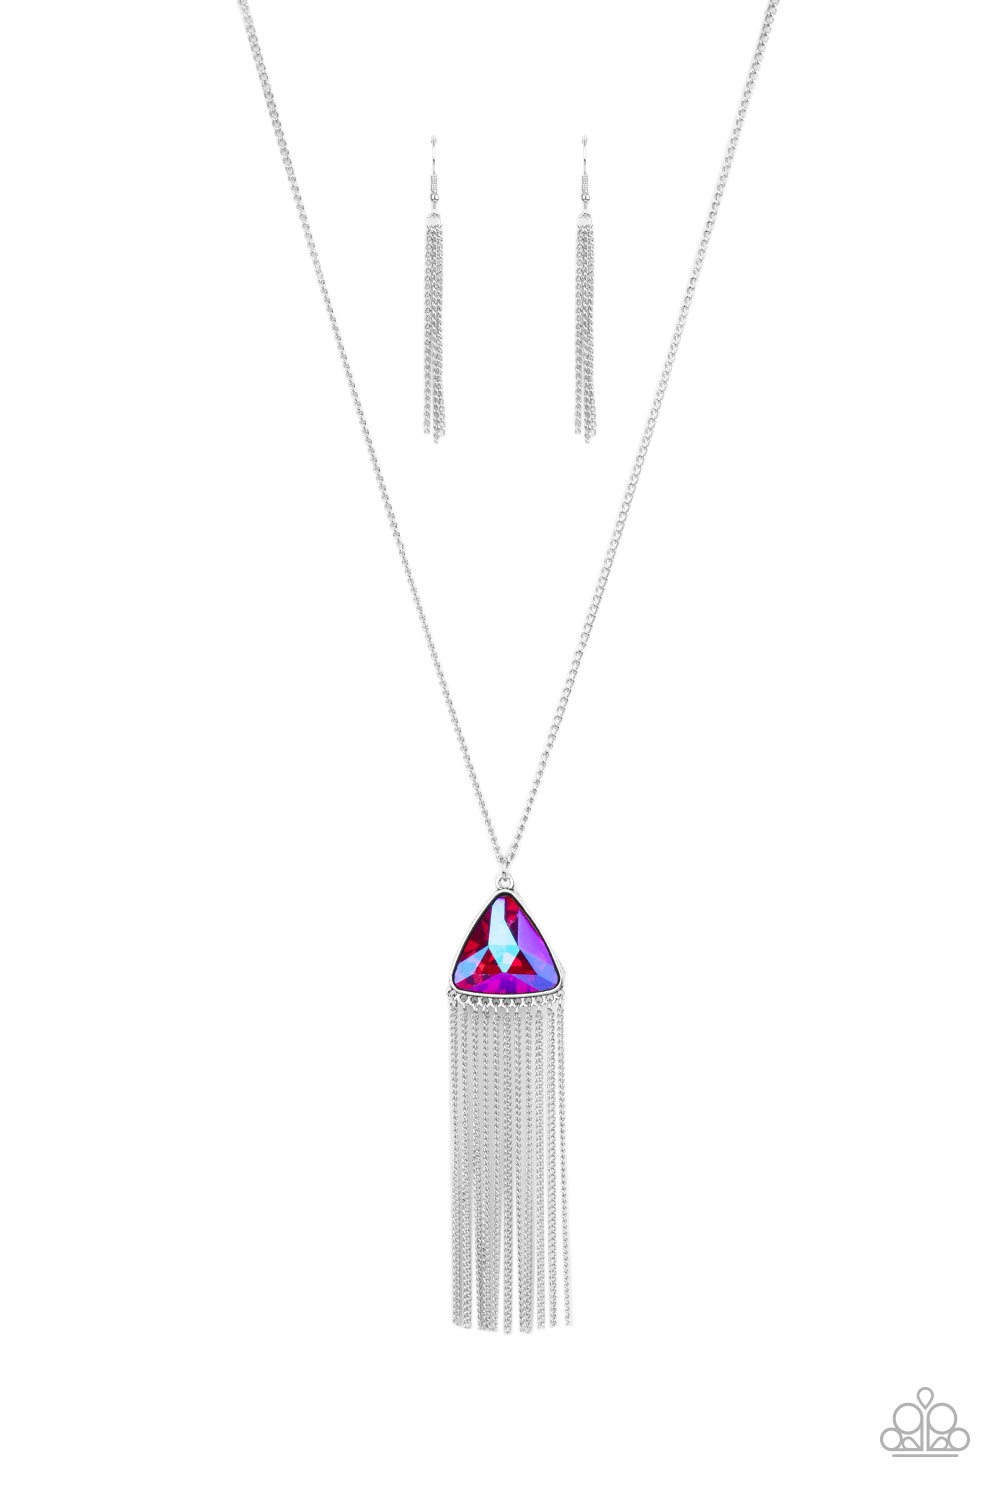 Proudly Prismatic - Pink necklace B080